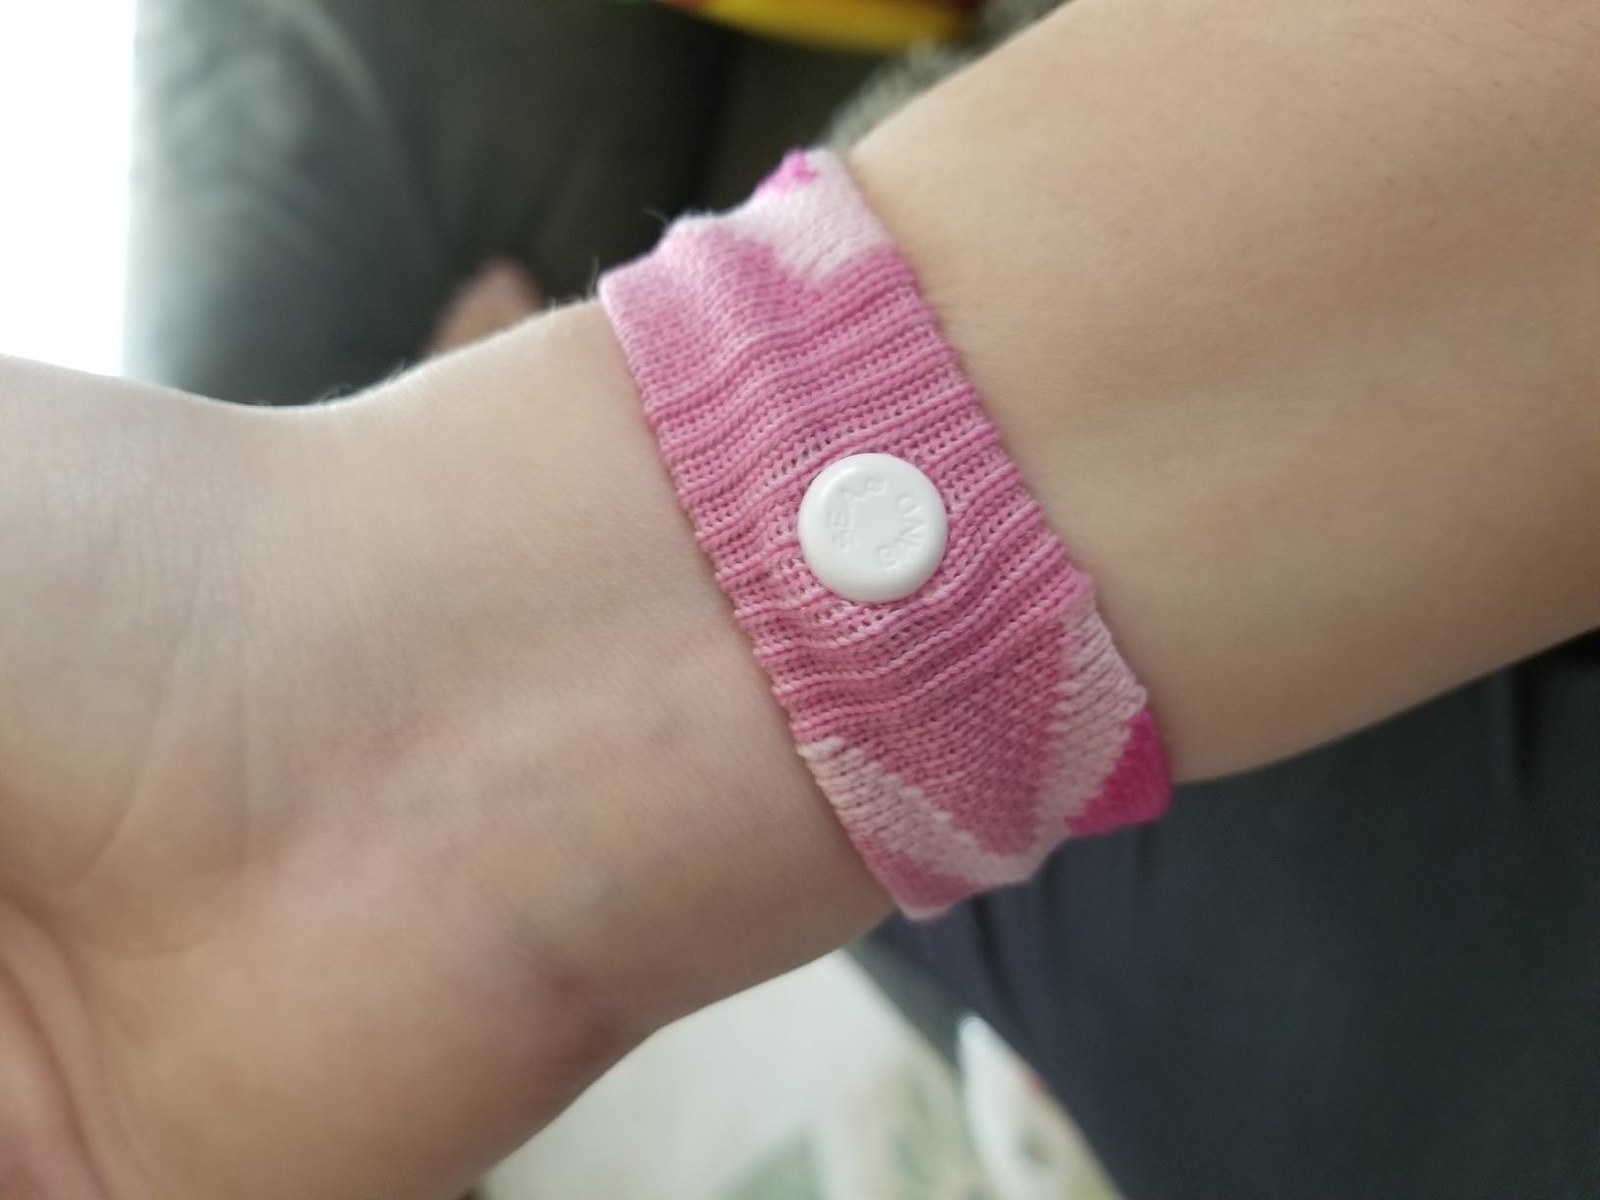 Reviewer wearing the pink band on their wrist